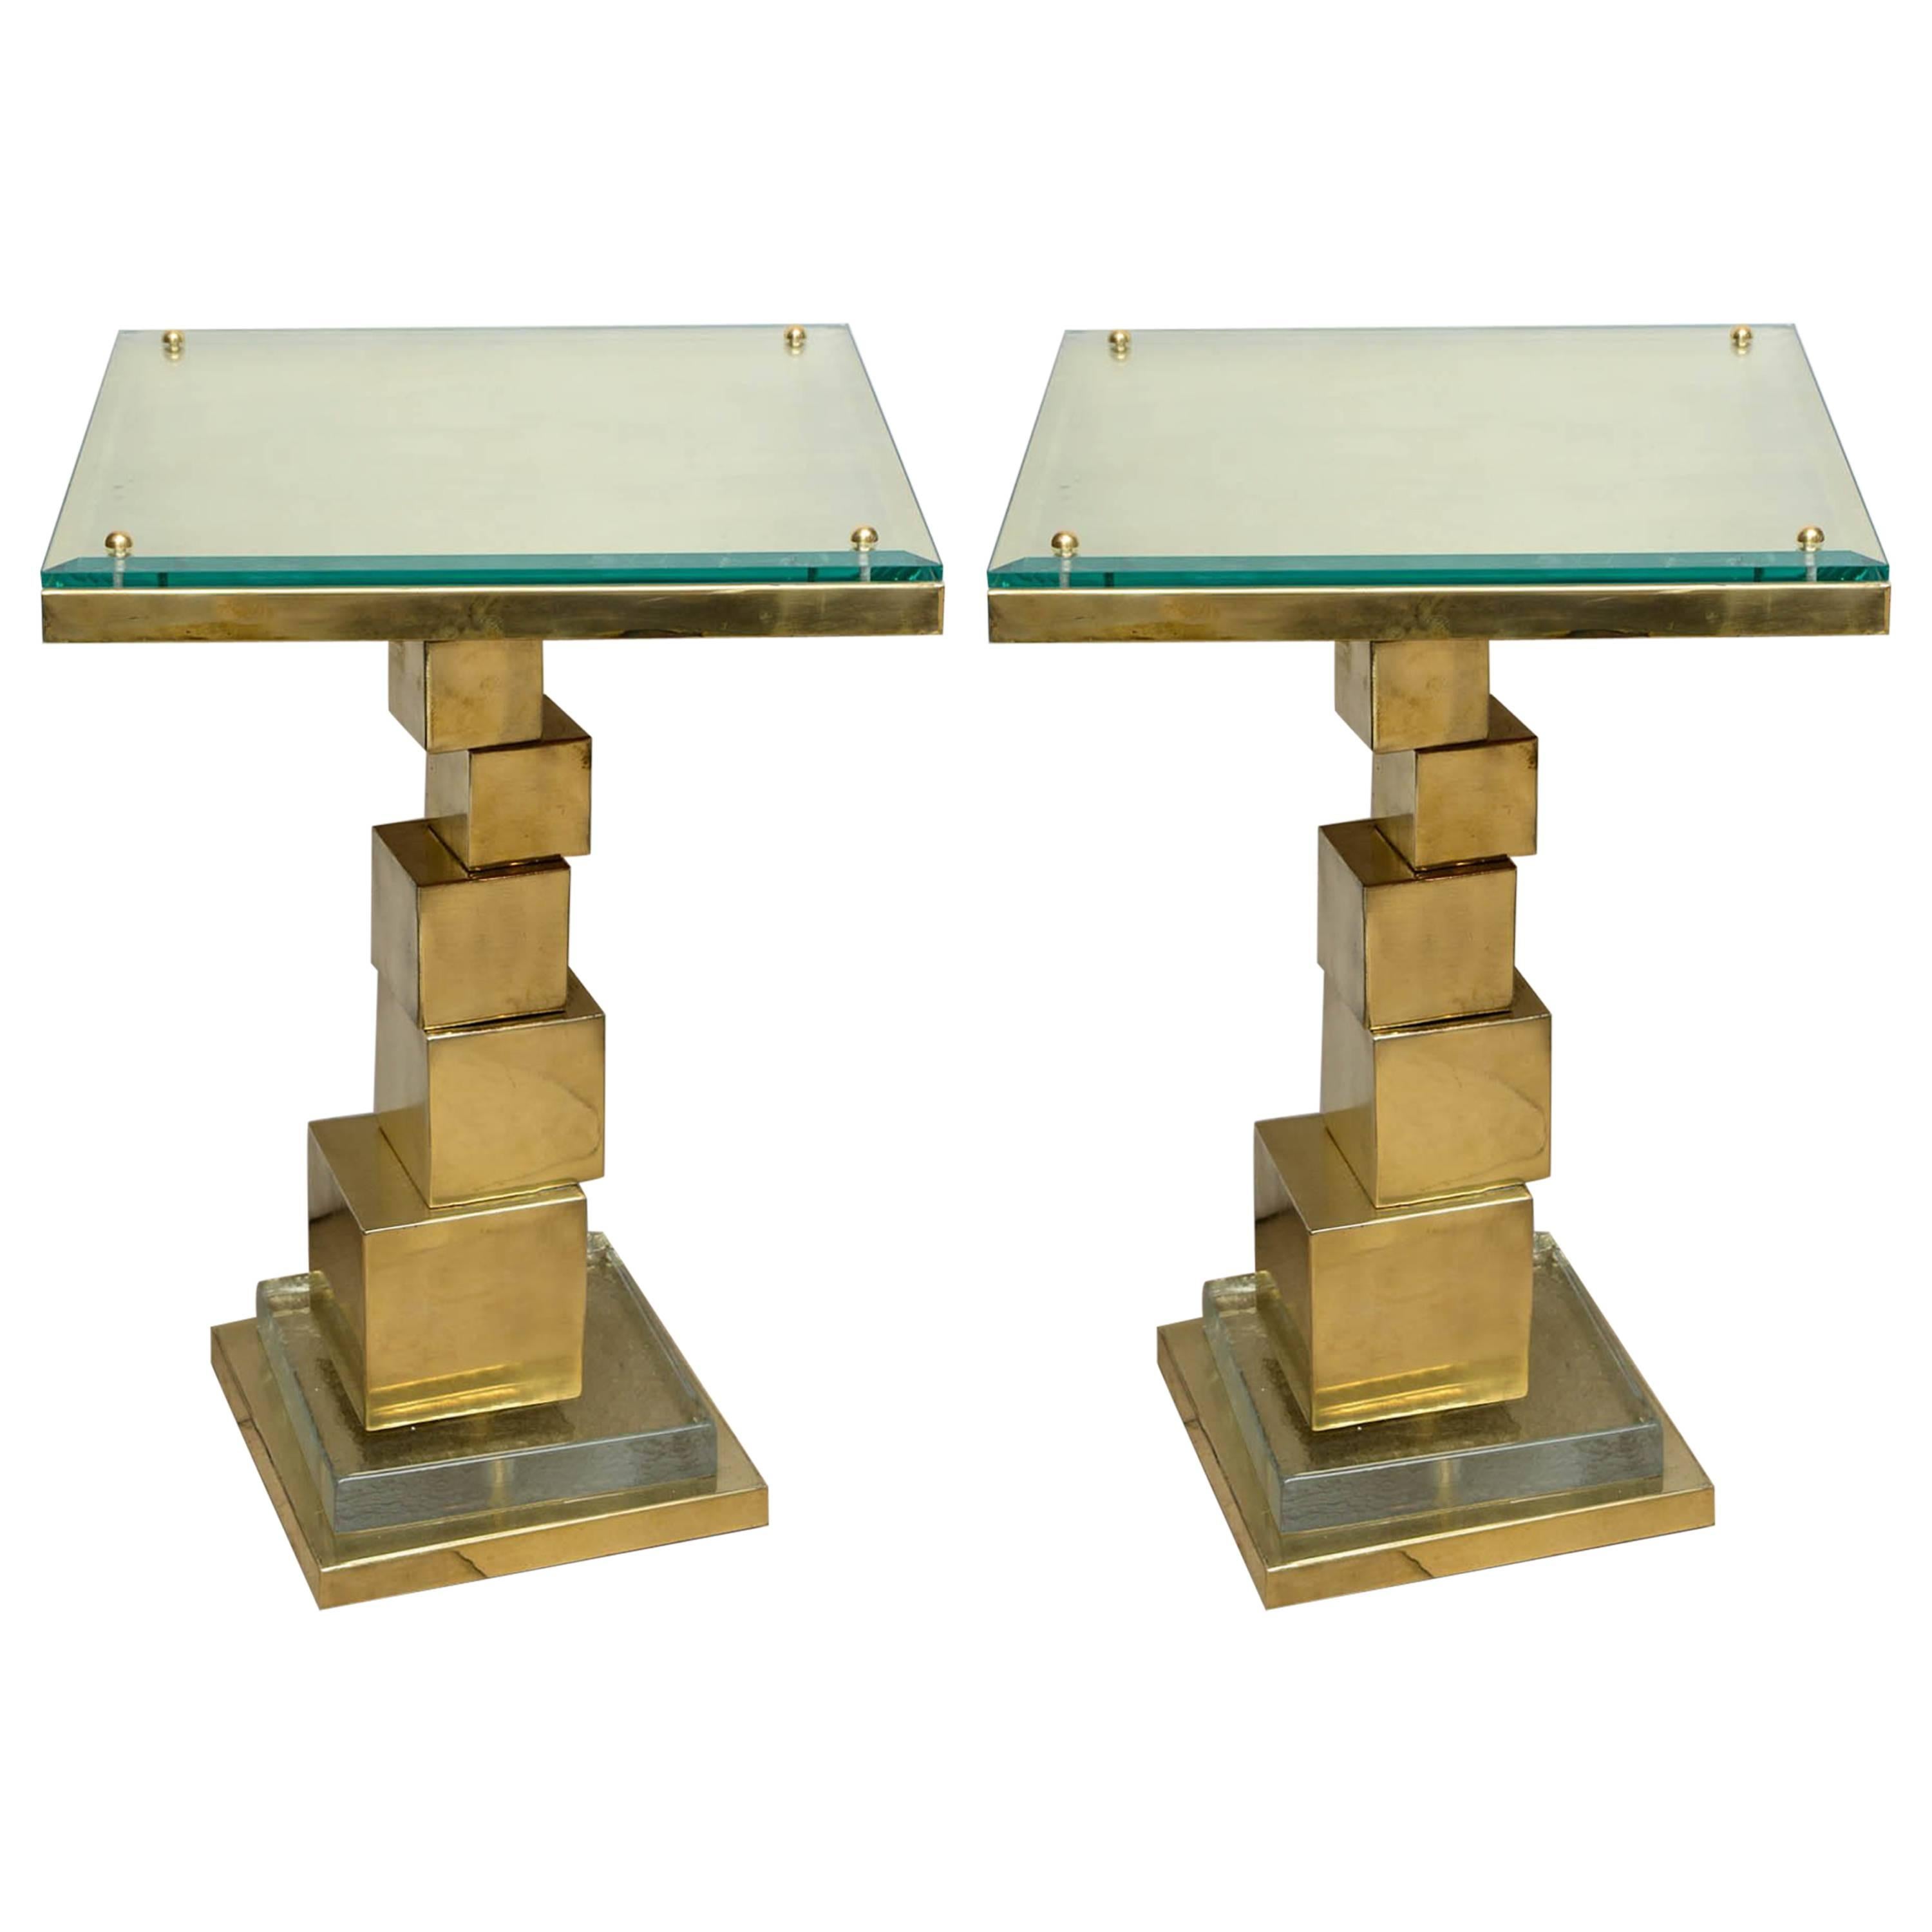 Pair of Cube Tables by Glustin Creation